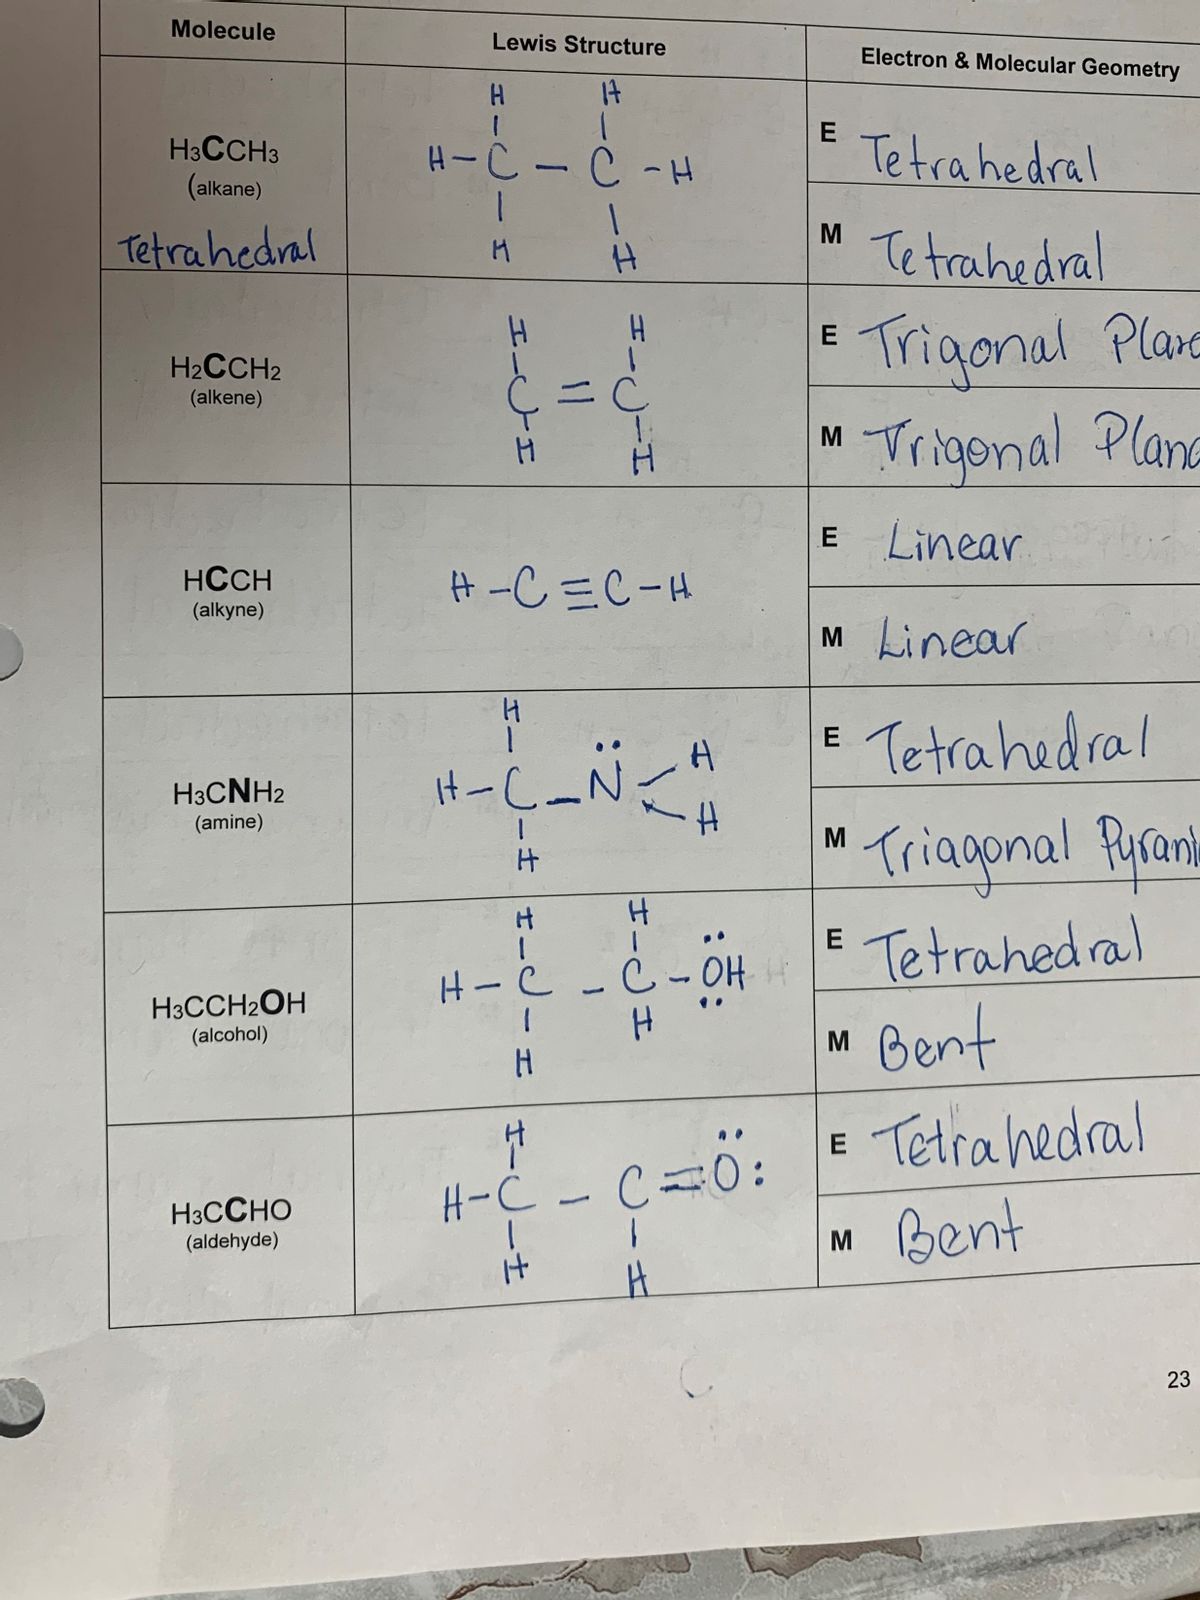 Hcch Lewis Structure Molecular Geometry - Draw Easy